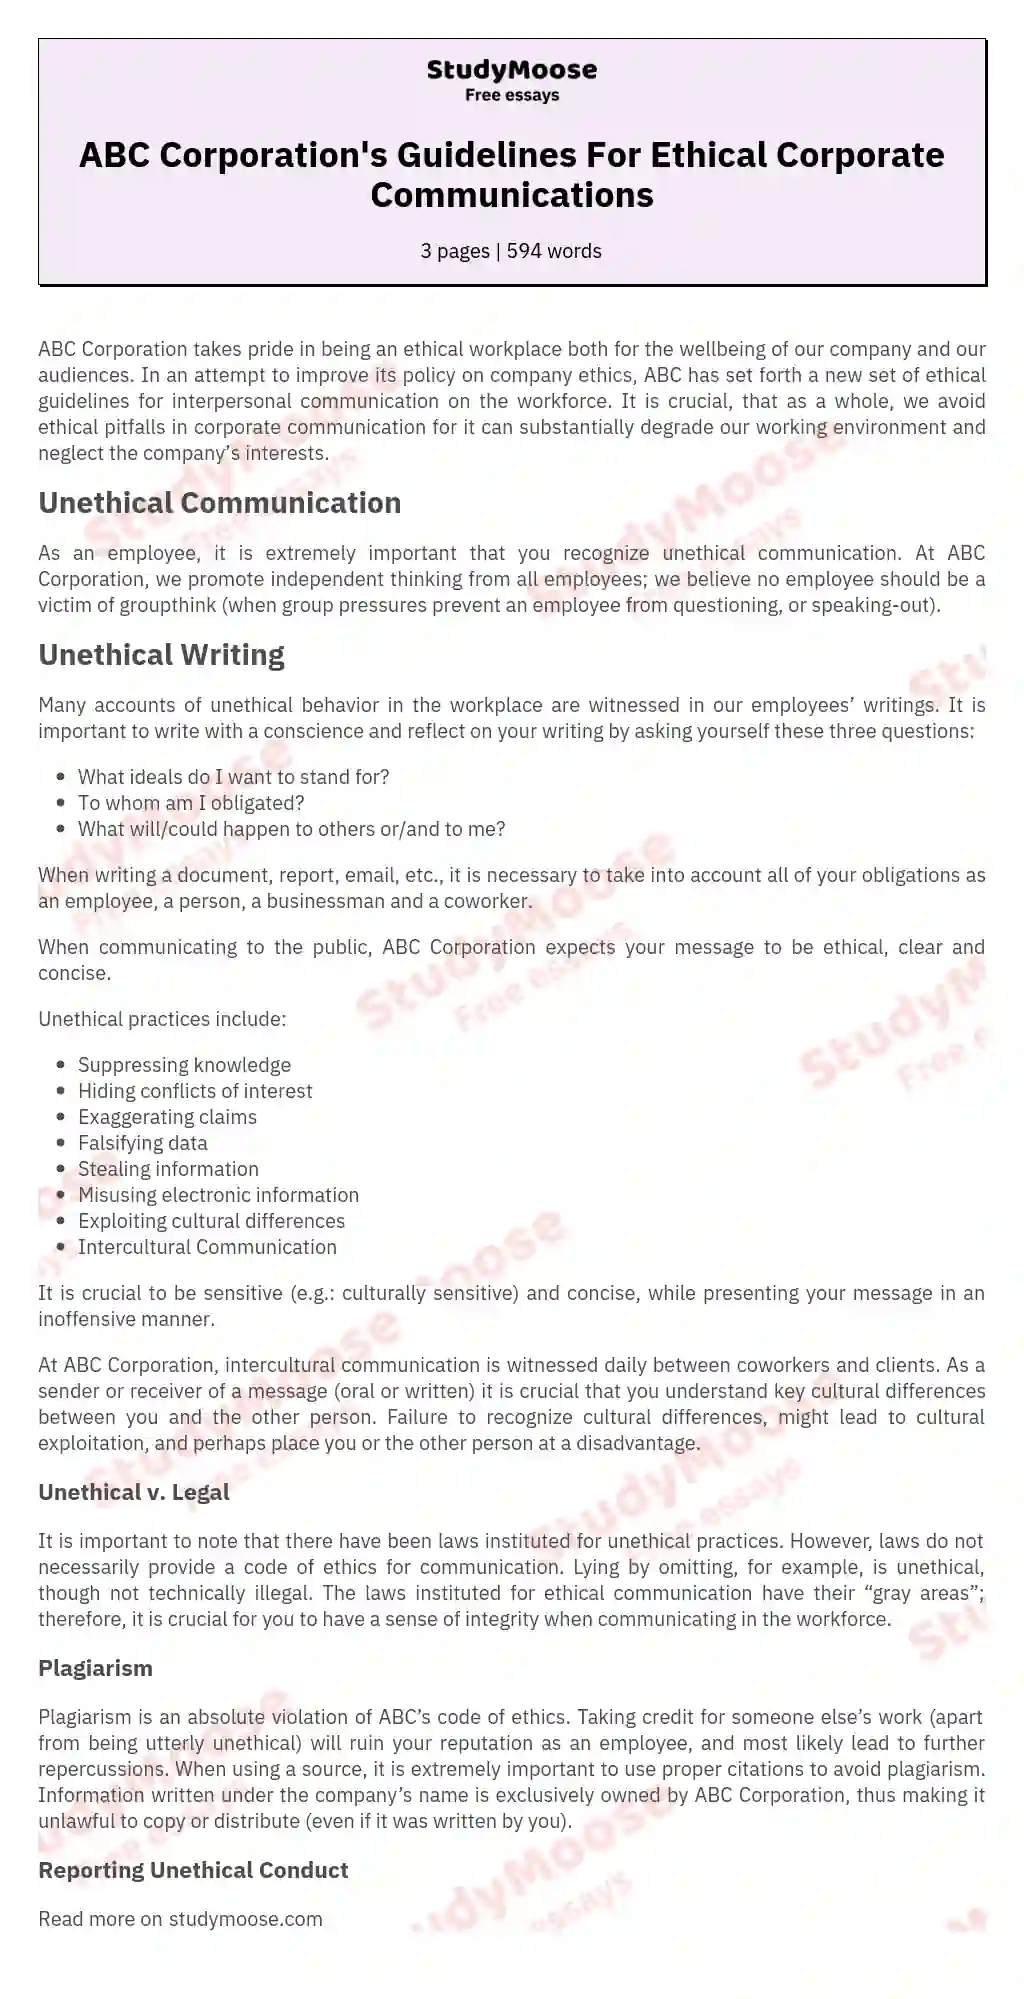 ABC Corporation's Guidelines For Ethical Corporate Communications essay